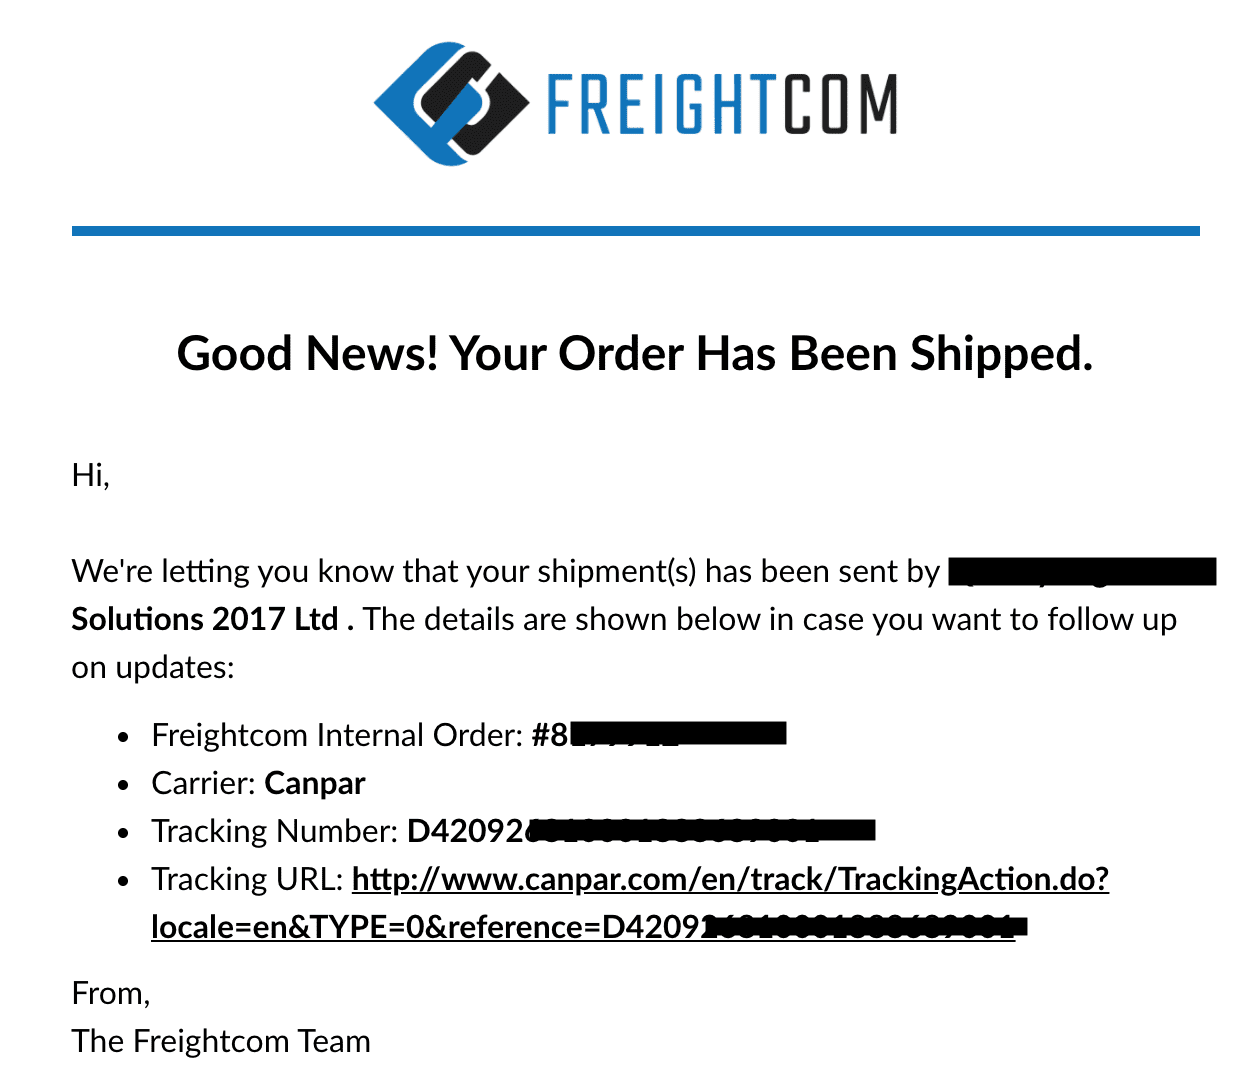 Shipping confirmation and parcel tracking email example from Freightcom